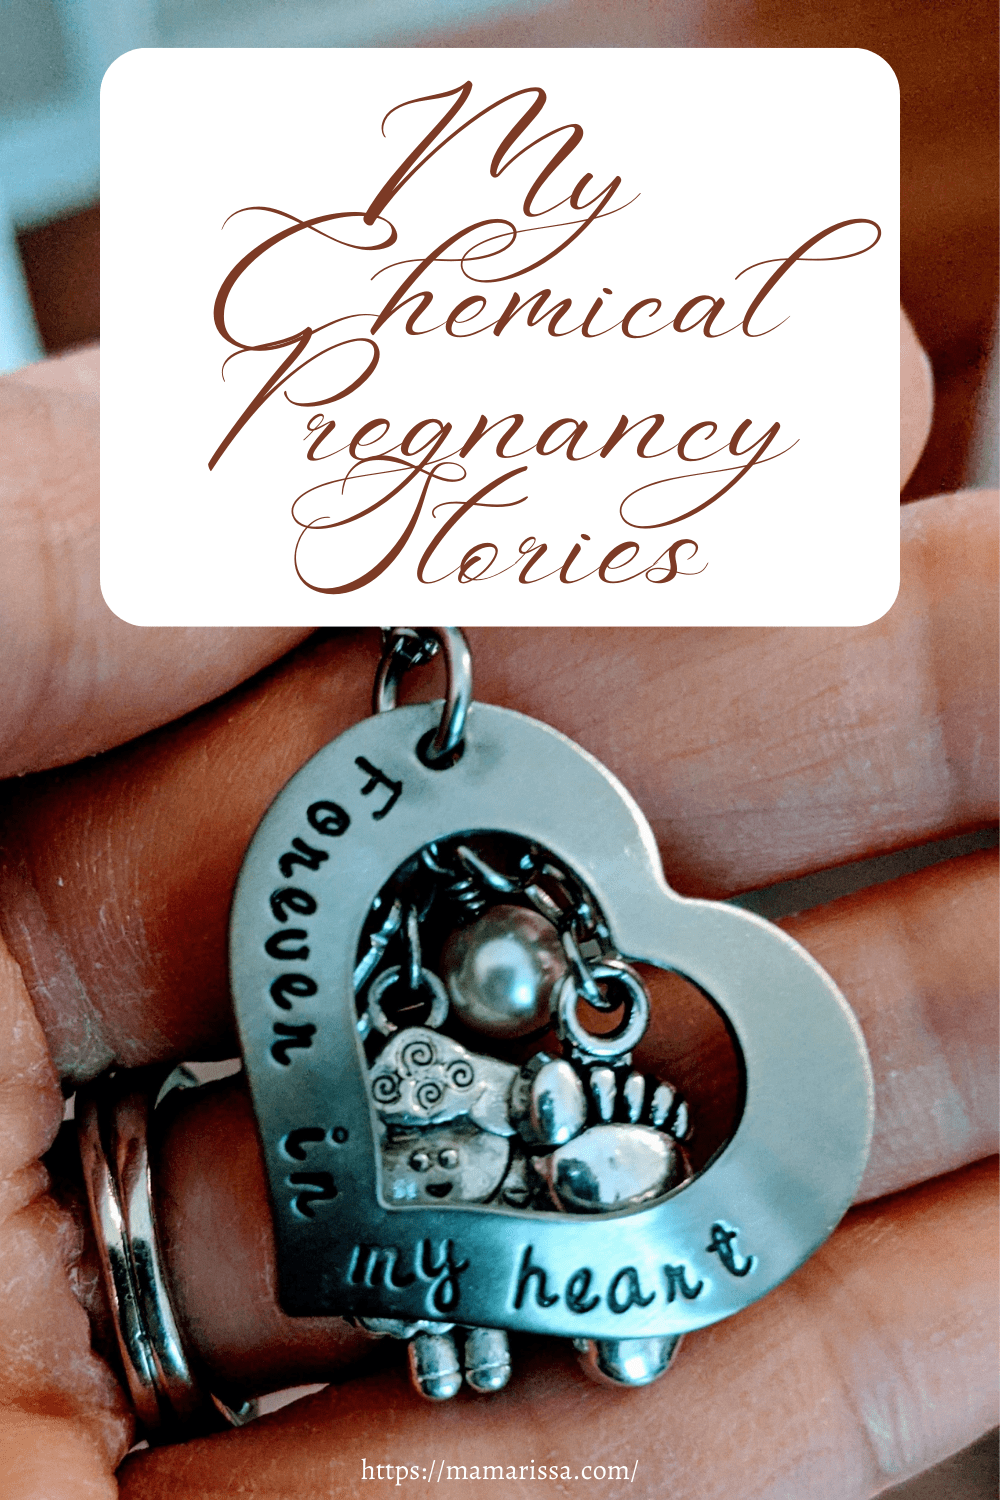 My Chemical Pregnancy Stories